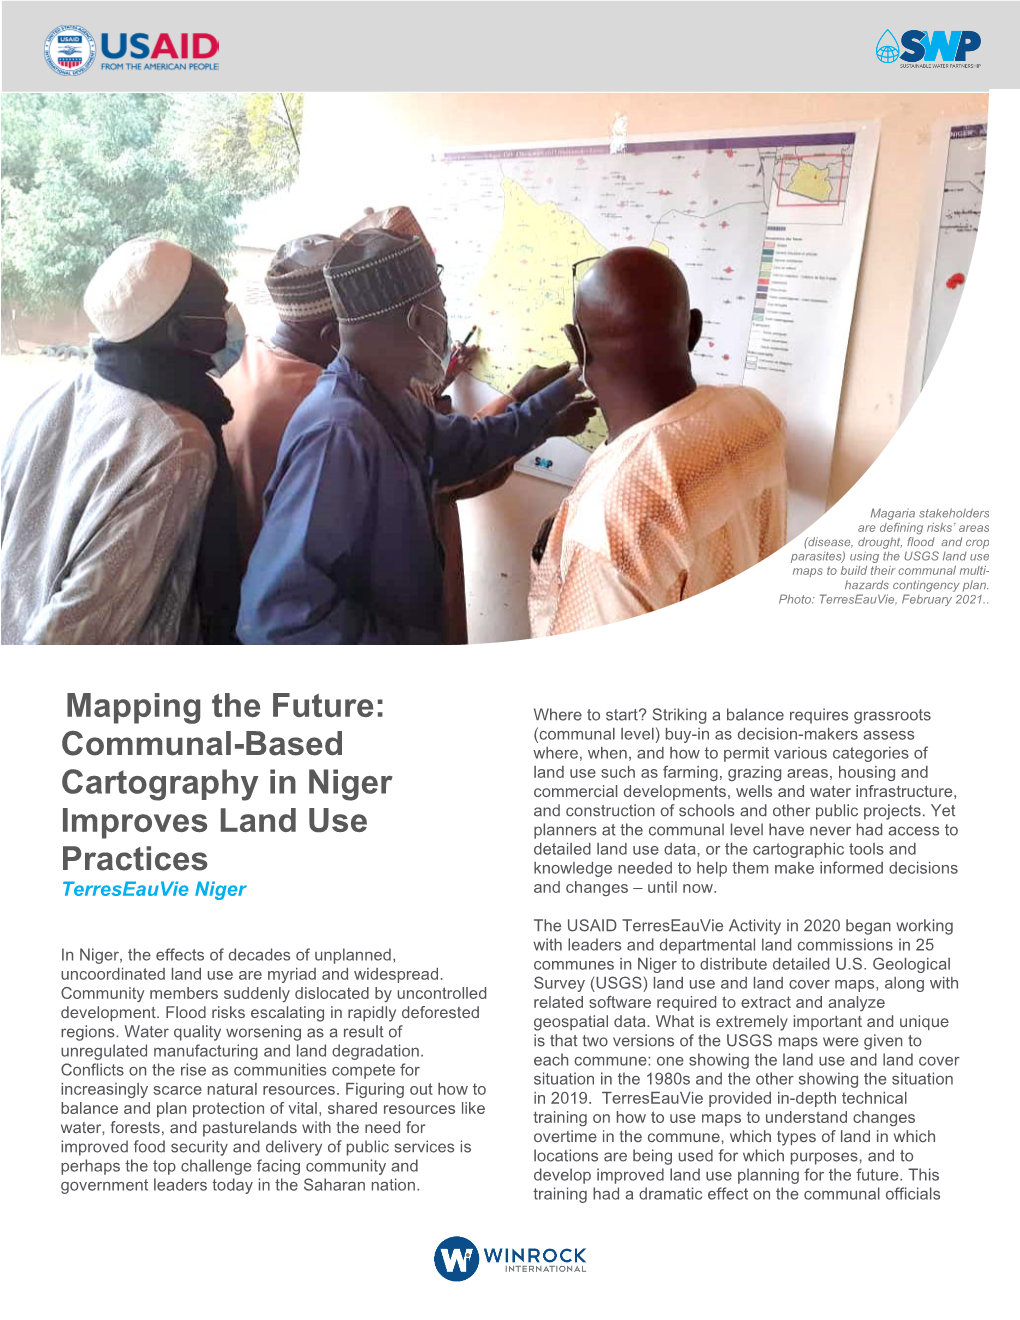 Mapping the Future: Communal-Based Cartography In